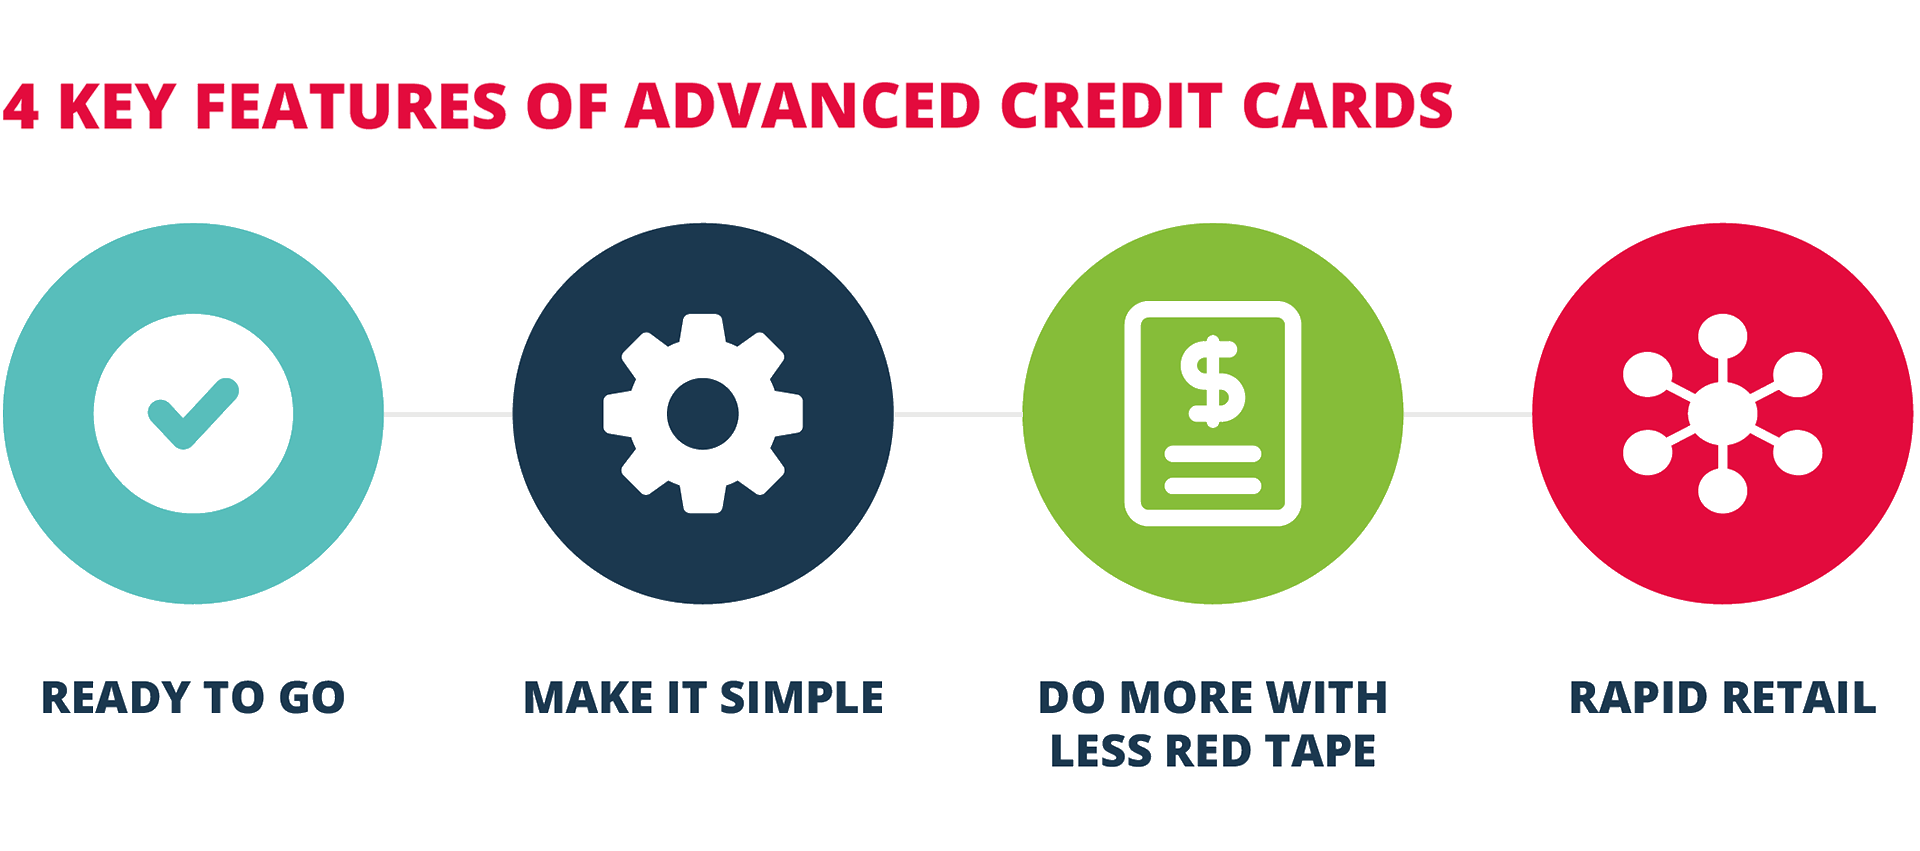 4 KEY FEATURES OF ADVANCED CREDIT CARDS